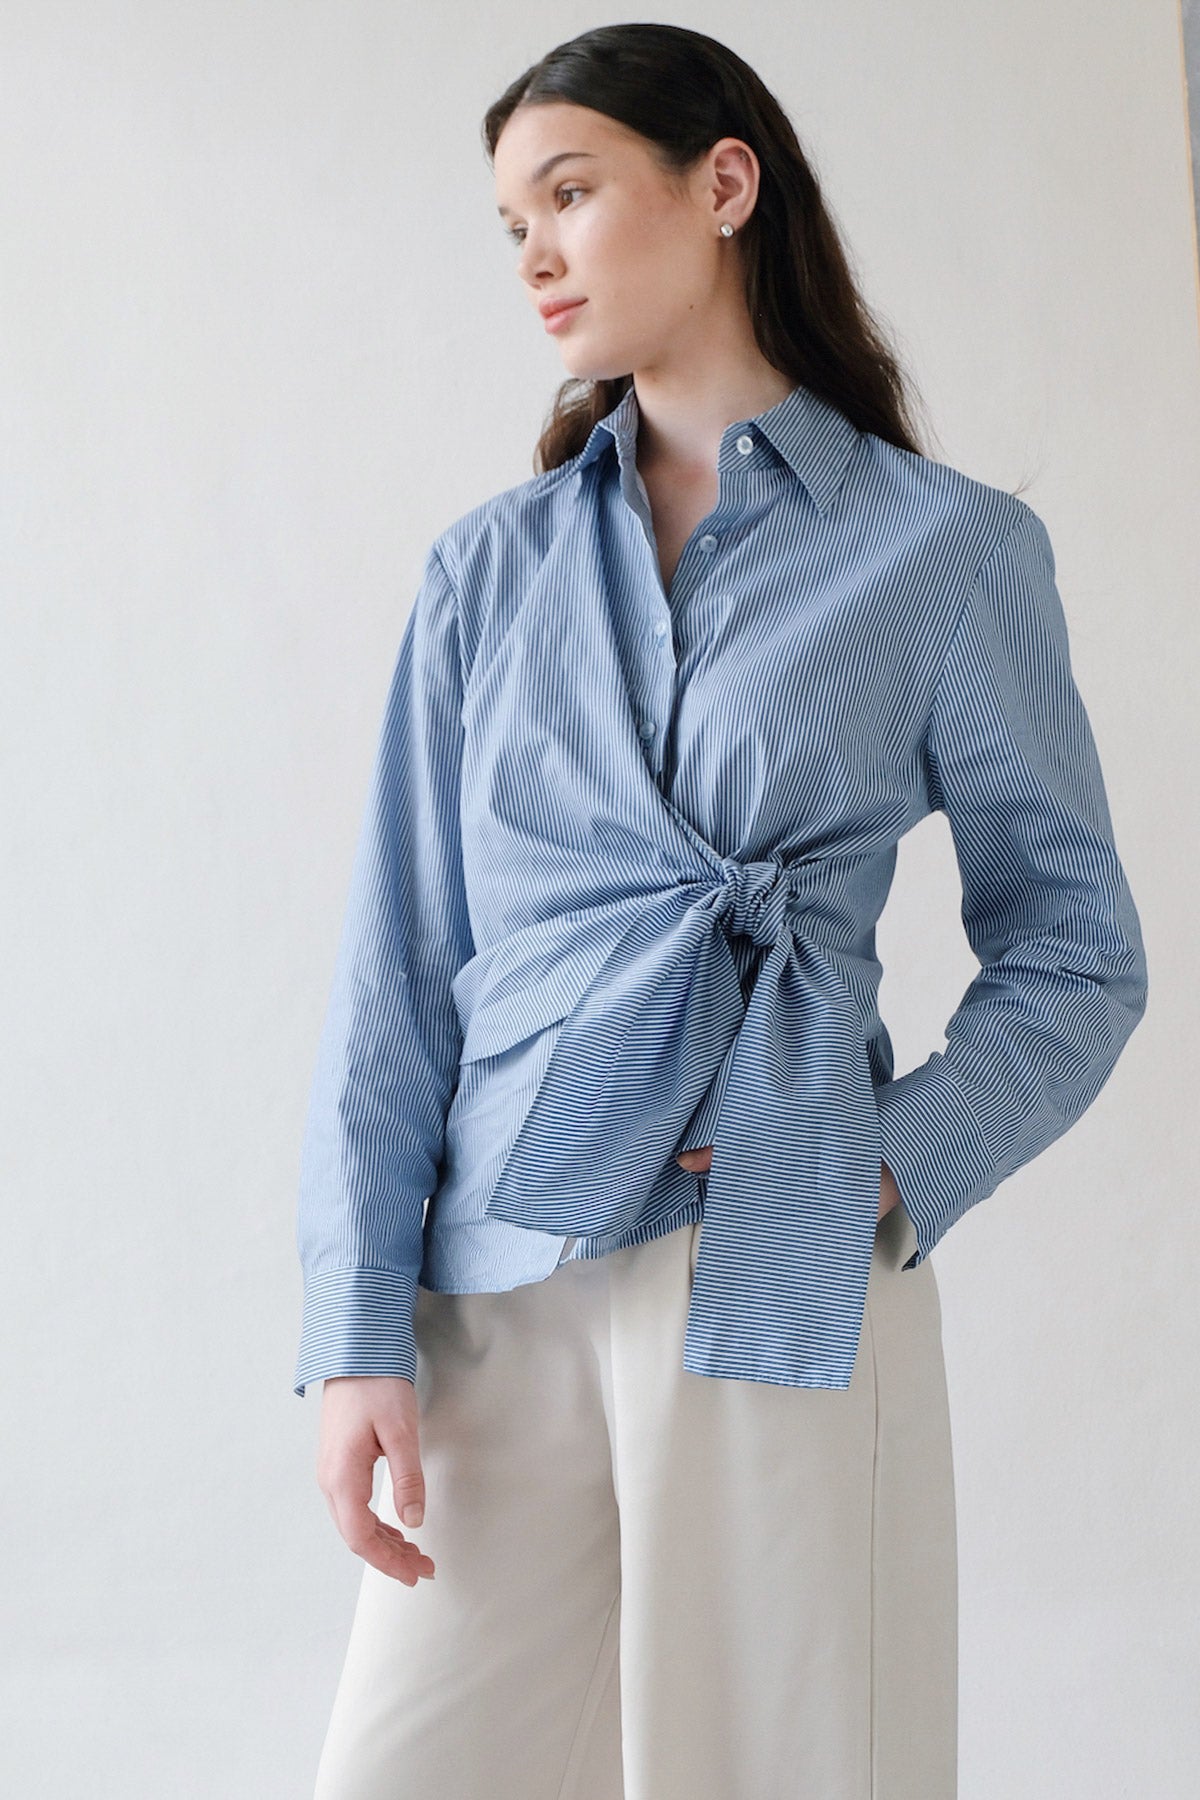 Zayah Wrapped Shirt in Blue Stripes (1ML LEFT)